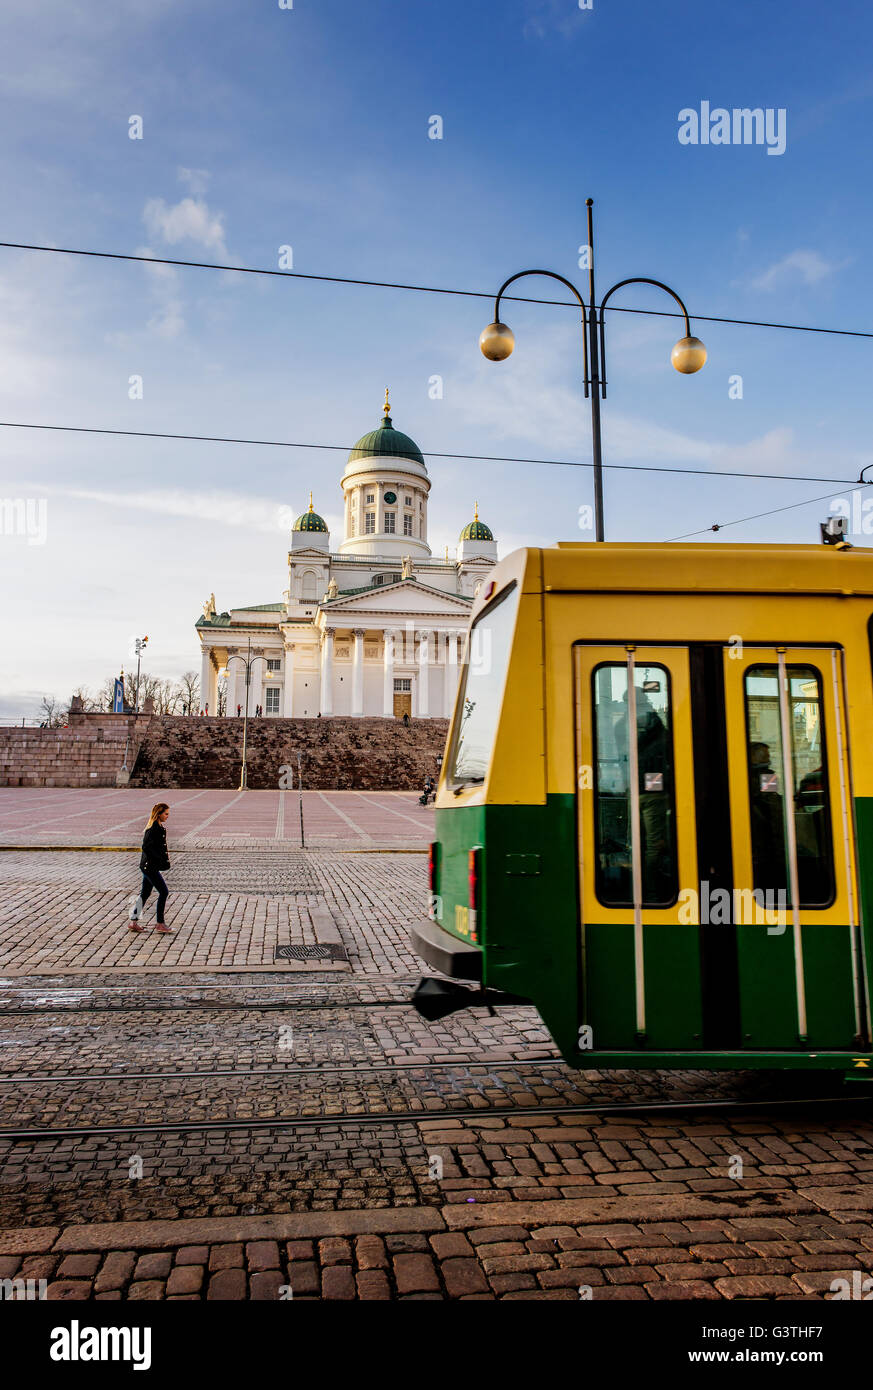 Finland, Helsinki, Krohohagen, Cable car, Helsinki Lutheral Cathedral in background Stock Photo